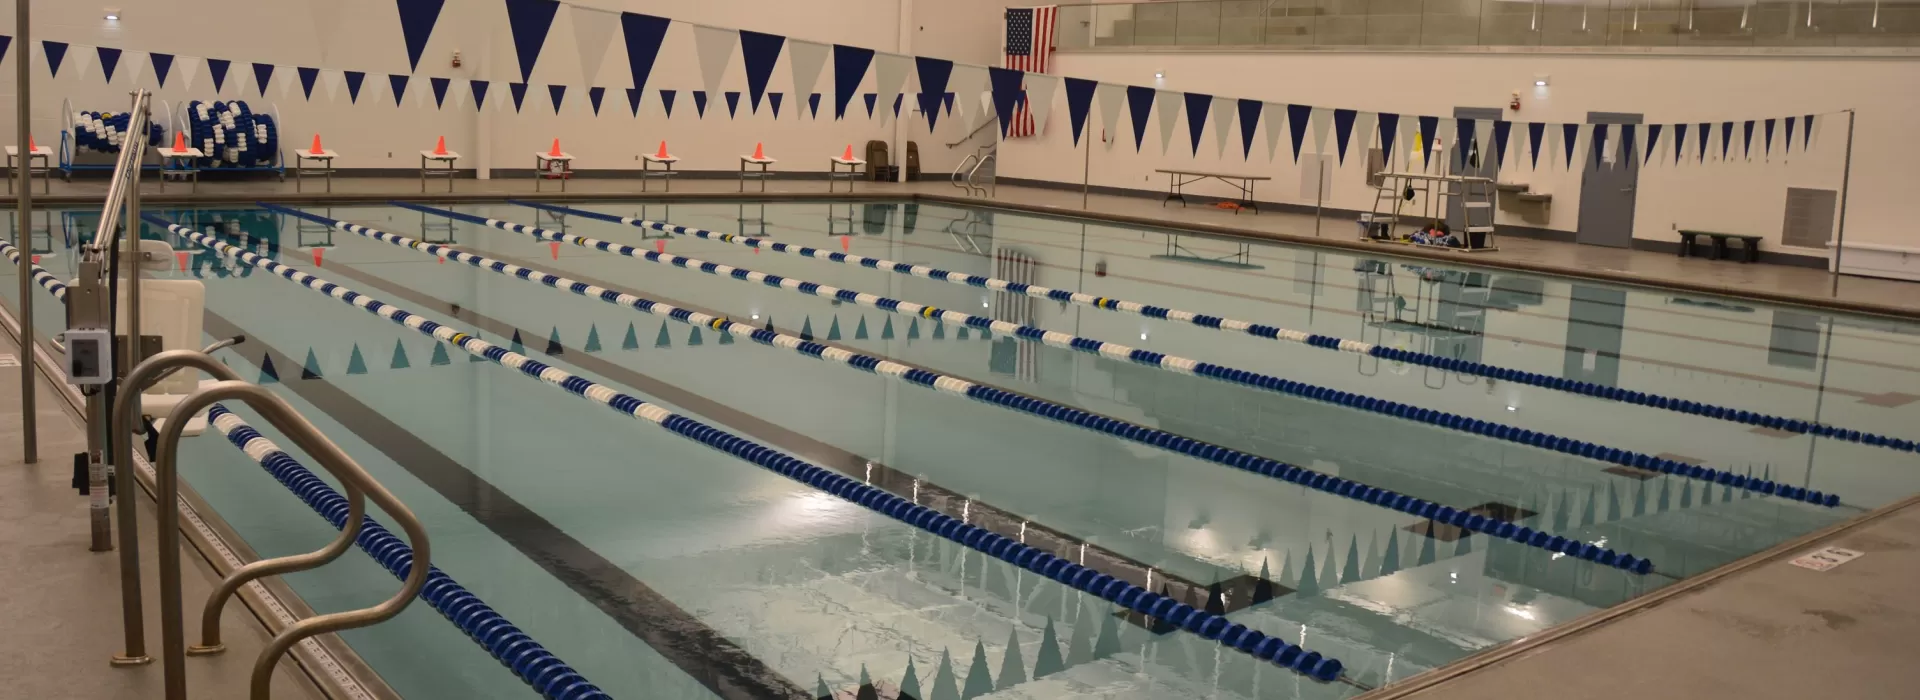 Pools reopen at Akron Area YMCA; hours limited due to pandemic